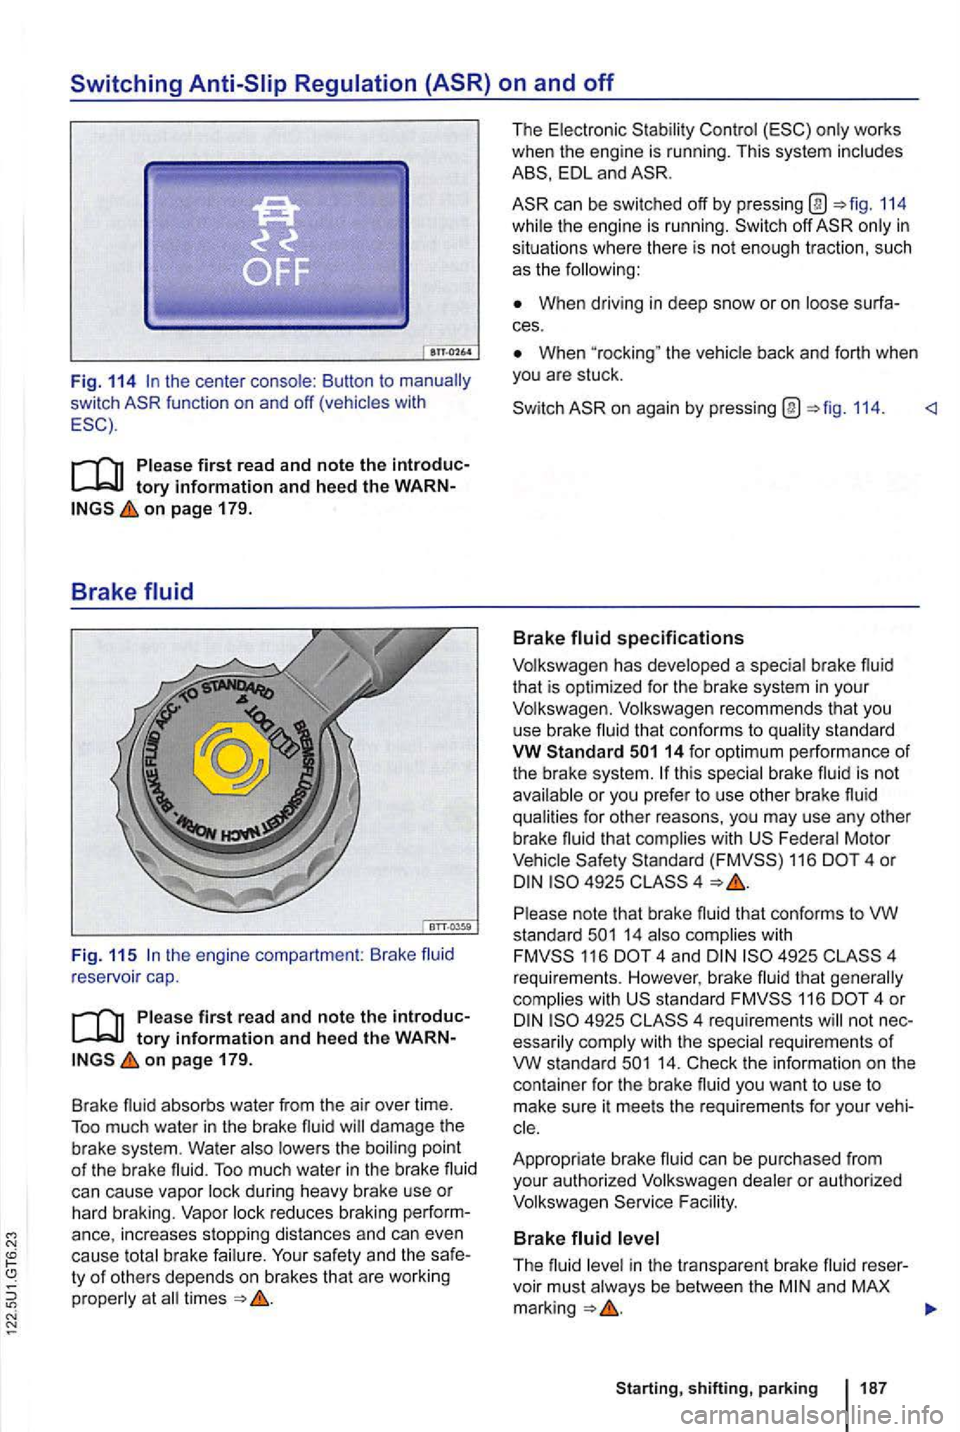 VOLKSWAGEN GOLF MK6 2012  Owners Manual Switching 
Fig. 114 
on page 179. 
Brake fluid 
Fig. 11 5 
on pag e 179. 
Brake  fluid 
absorbs water from the air over time. 
To o much water in the brake  fluid will damage the brake system. Water a